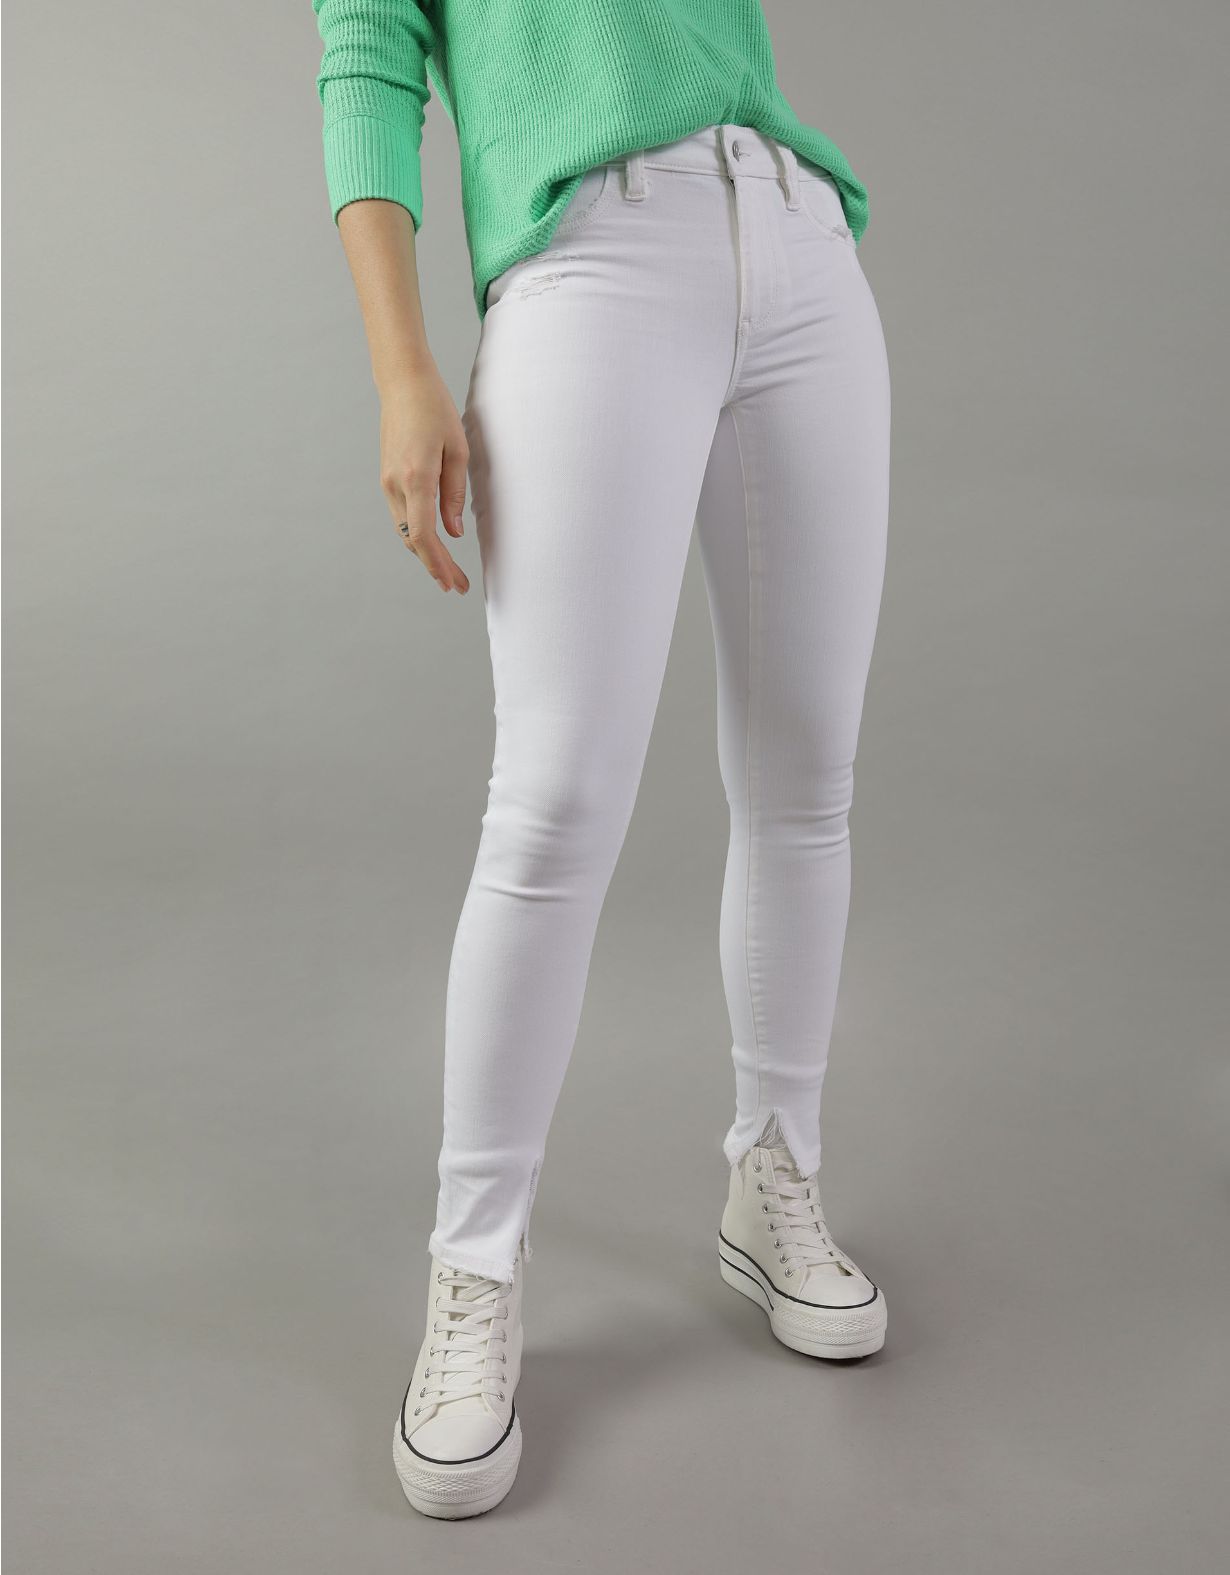 AE Next Level Curvy Low-Rise Jegging